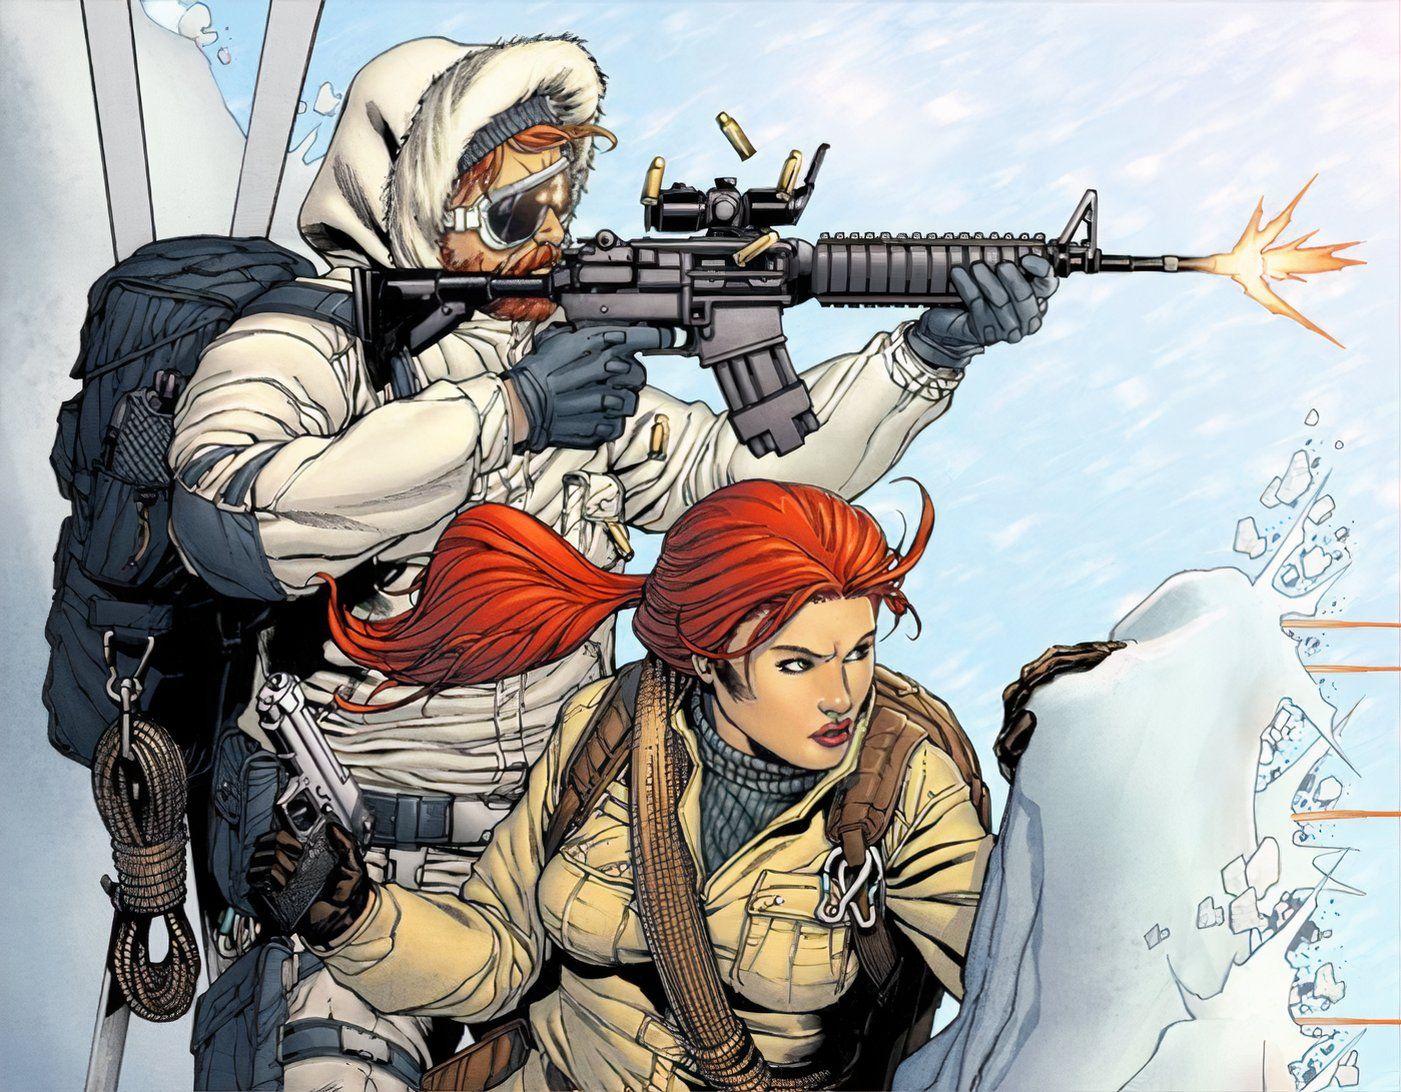 Scarlett #1, Snow Job and Scarlett returning fire from cover behind a snow bank, which is being riddled with bullets.